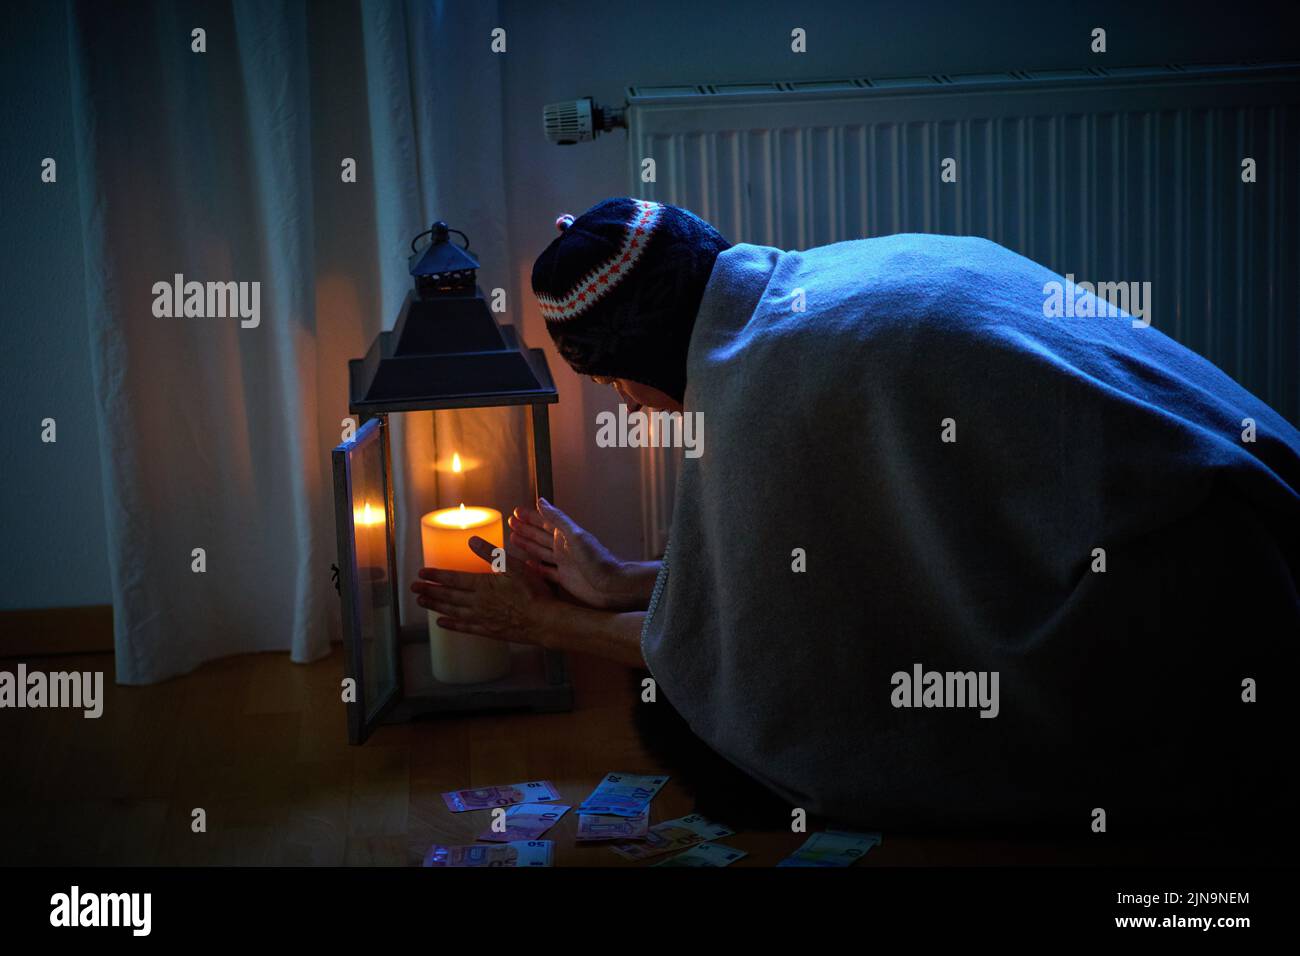 Symbolic image and illustration heating costs are constantly increasing due to the rise in the price of heating oil and gas at Aug 09, 2022 in  Marktoberdorf © Peter Schatz / Alamy Live News  MR=Yes, model released Stock Photo